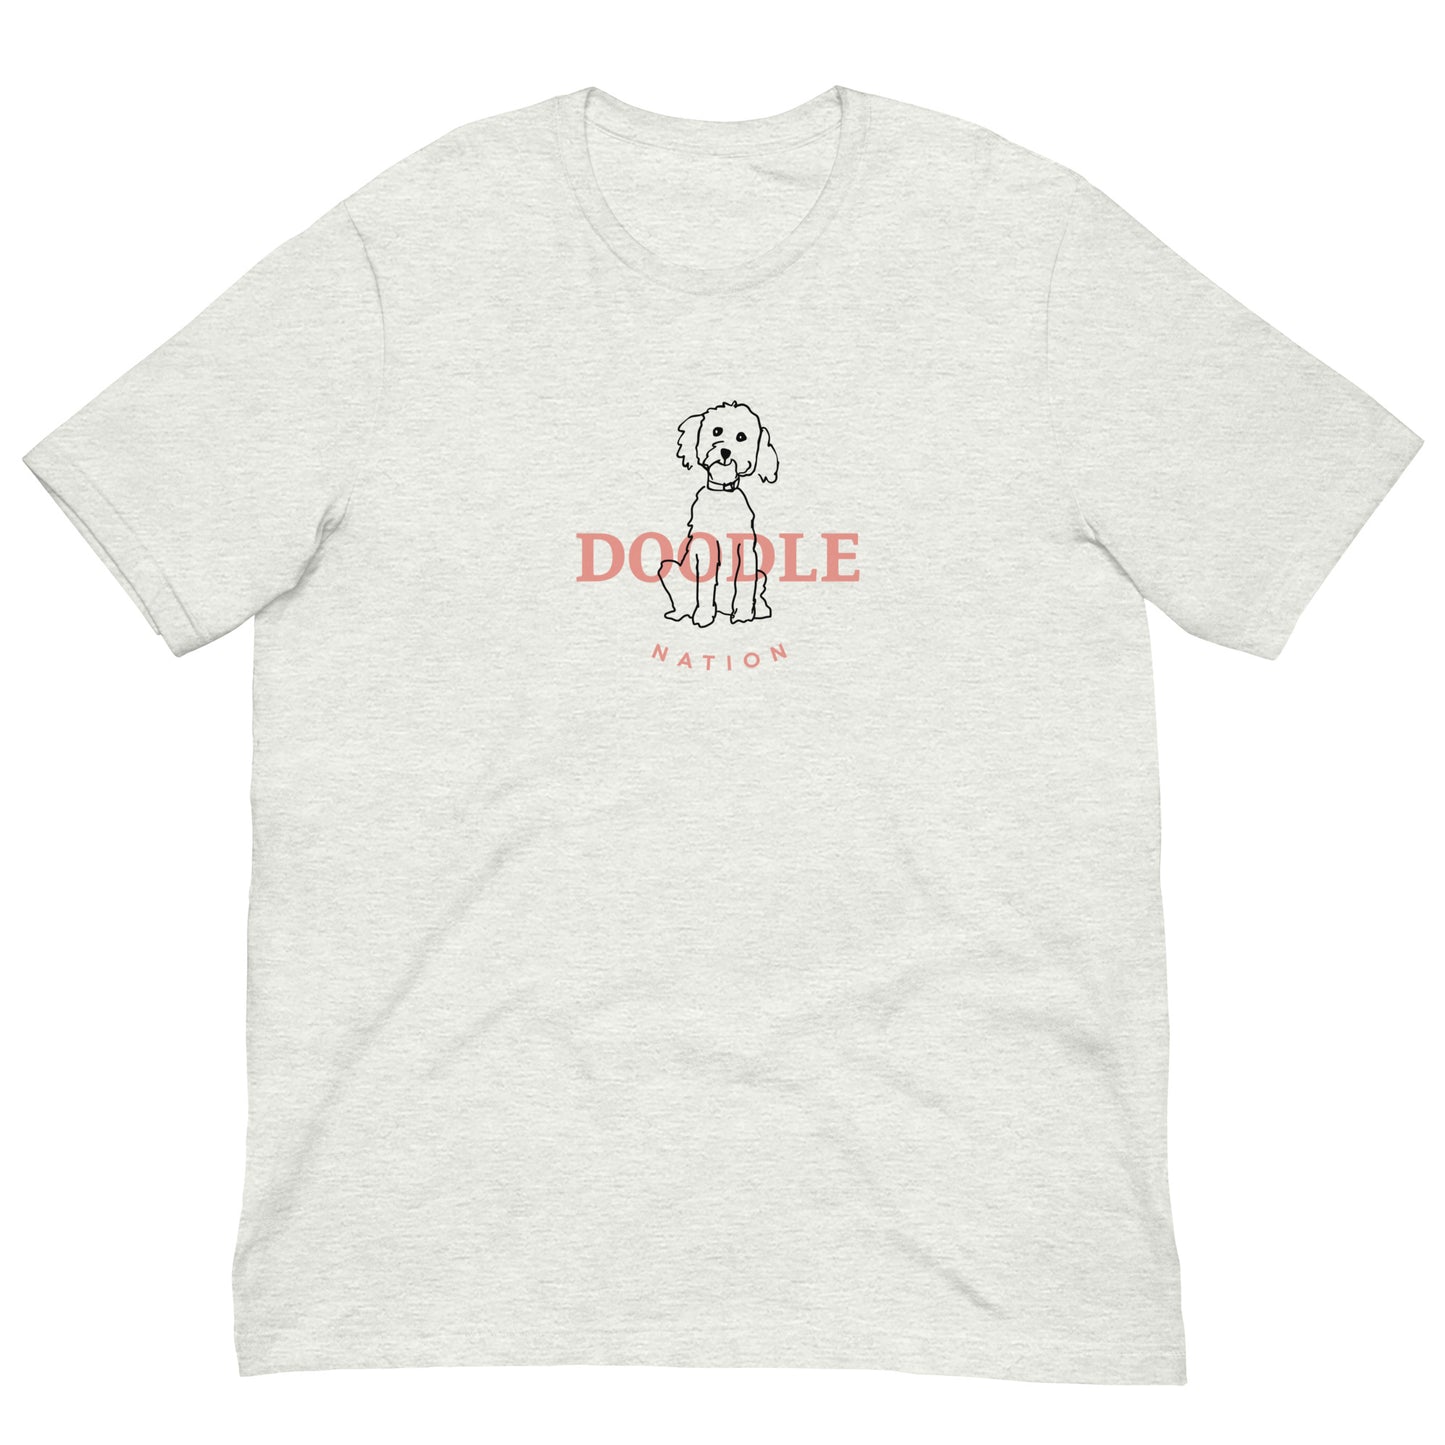 Goldendoodle t-shirt with Goldendoodle and words "Doodle Nation" in ash color